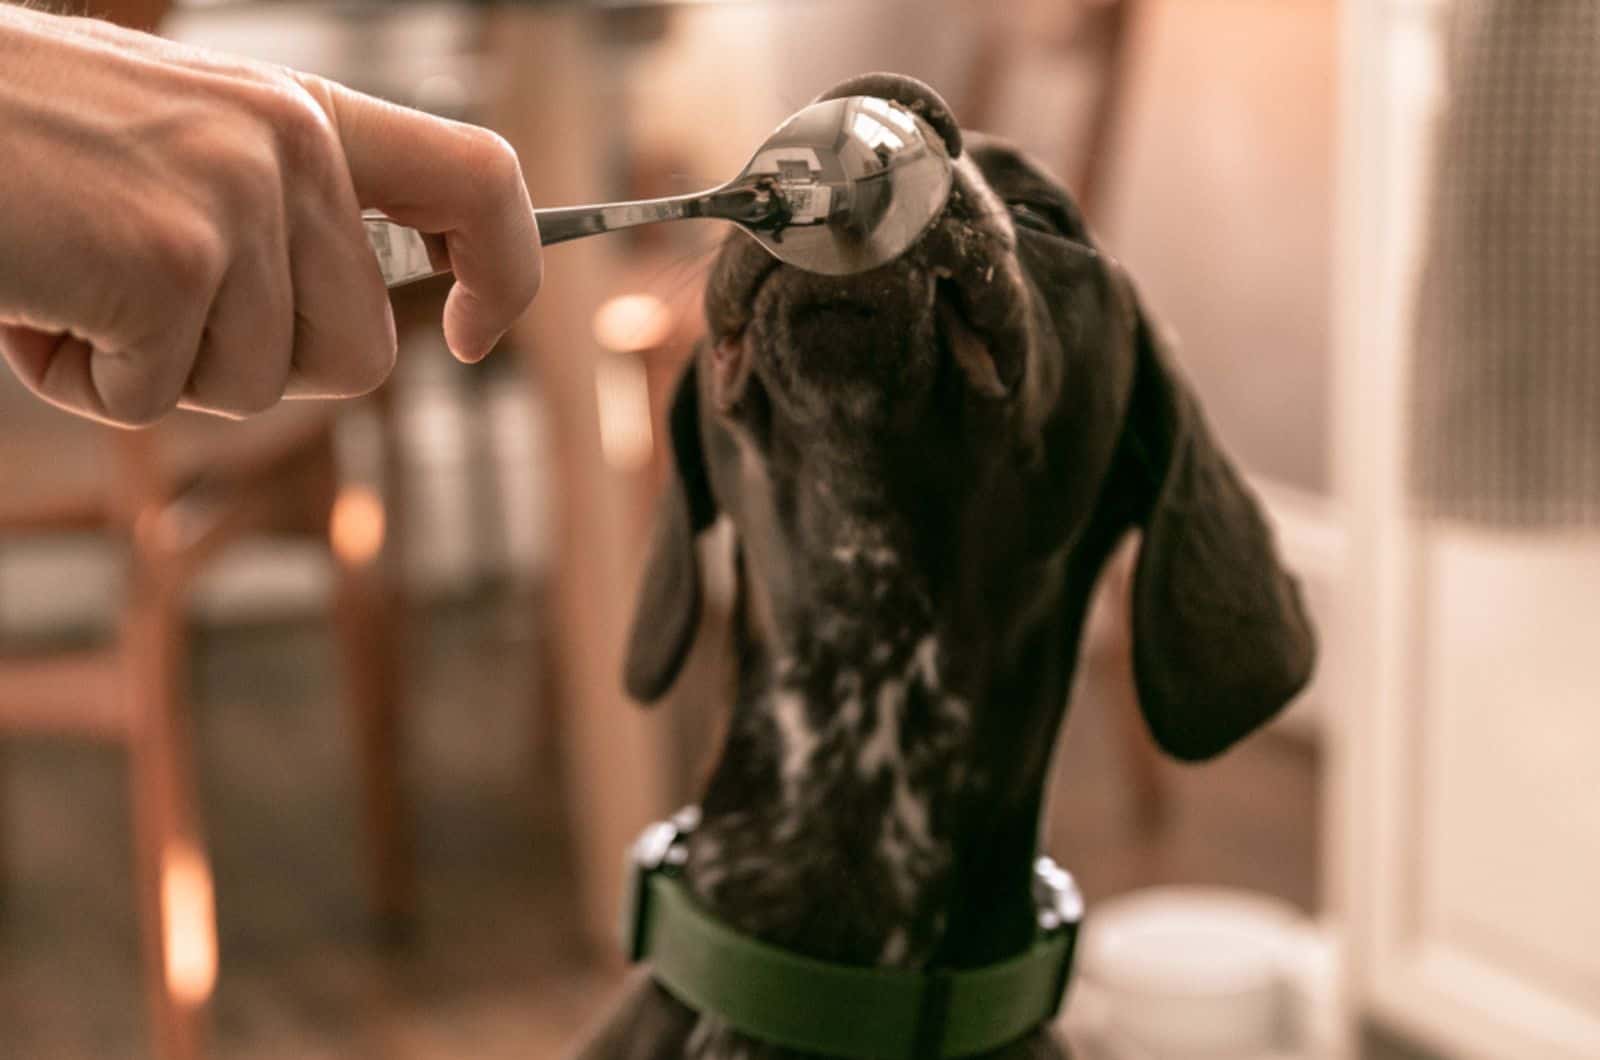 german shorthaired pointer eating from a spoon